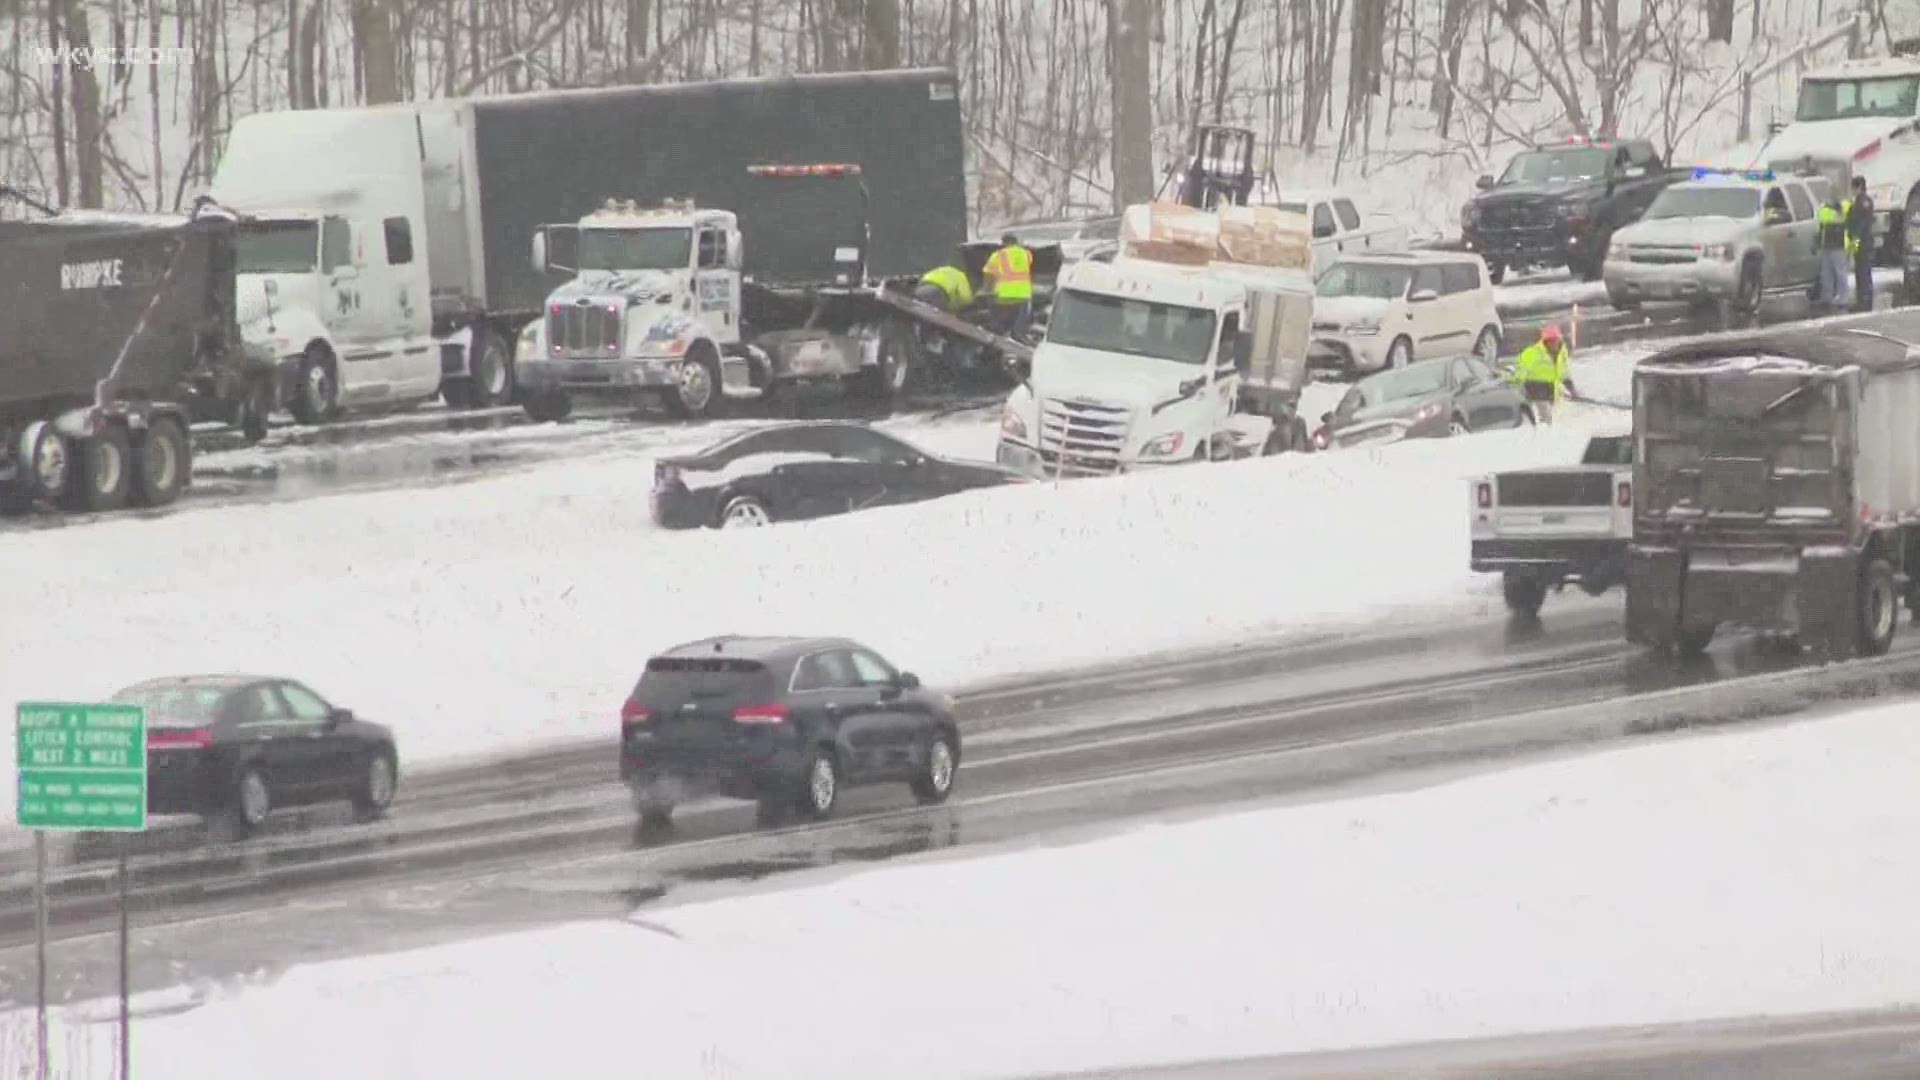 Lake effect snow triggered a handful of traffic issues throughout Northeast Ohio, including the closure of I-77 from Ghent Road to the Summit / Cuyahoga county line.